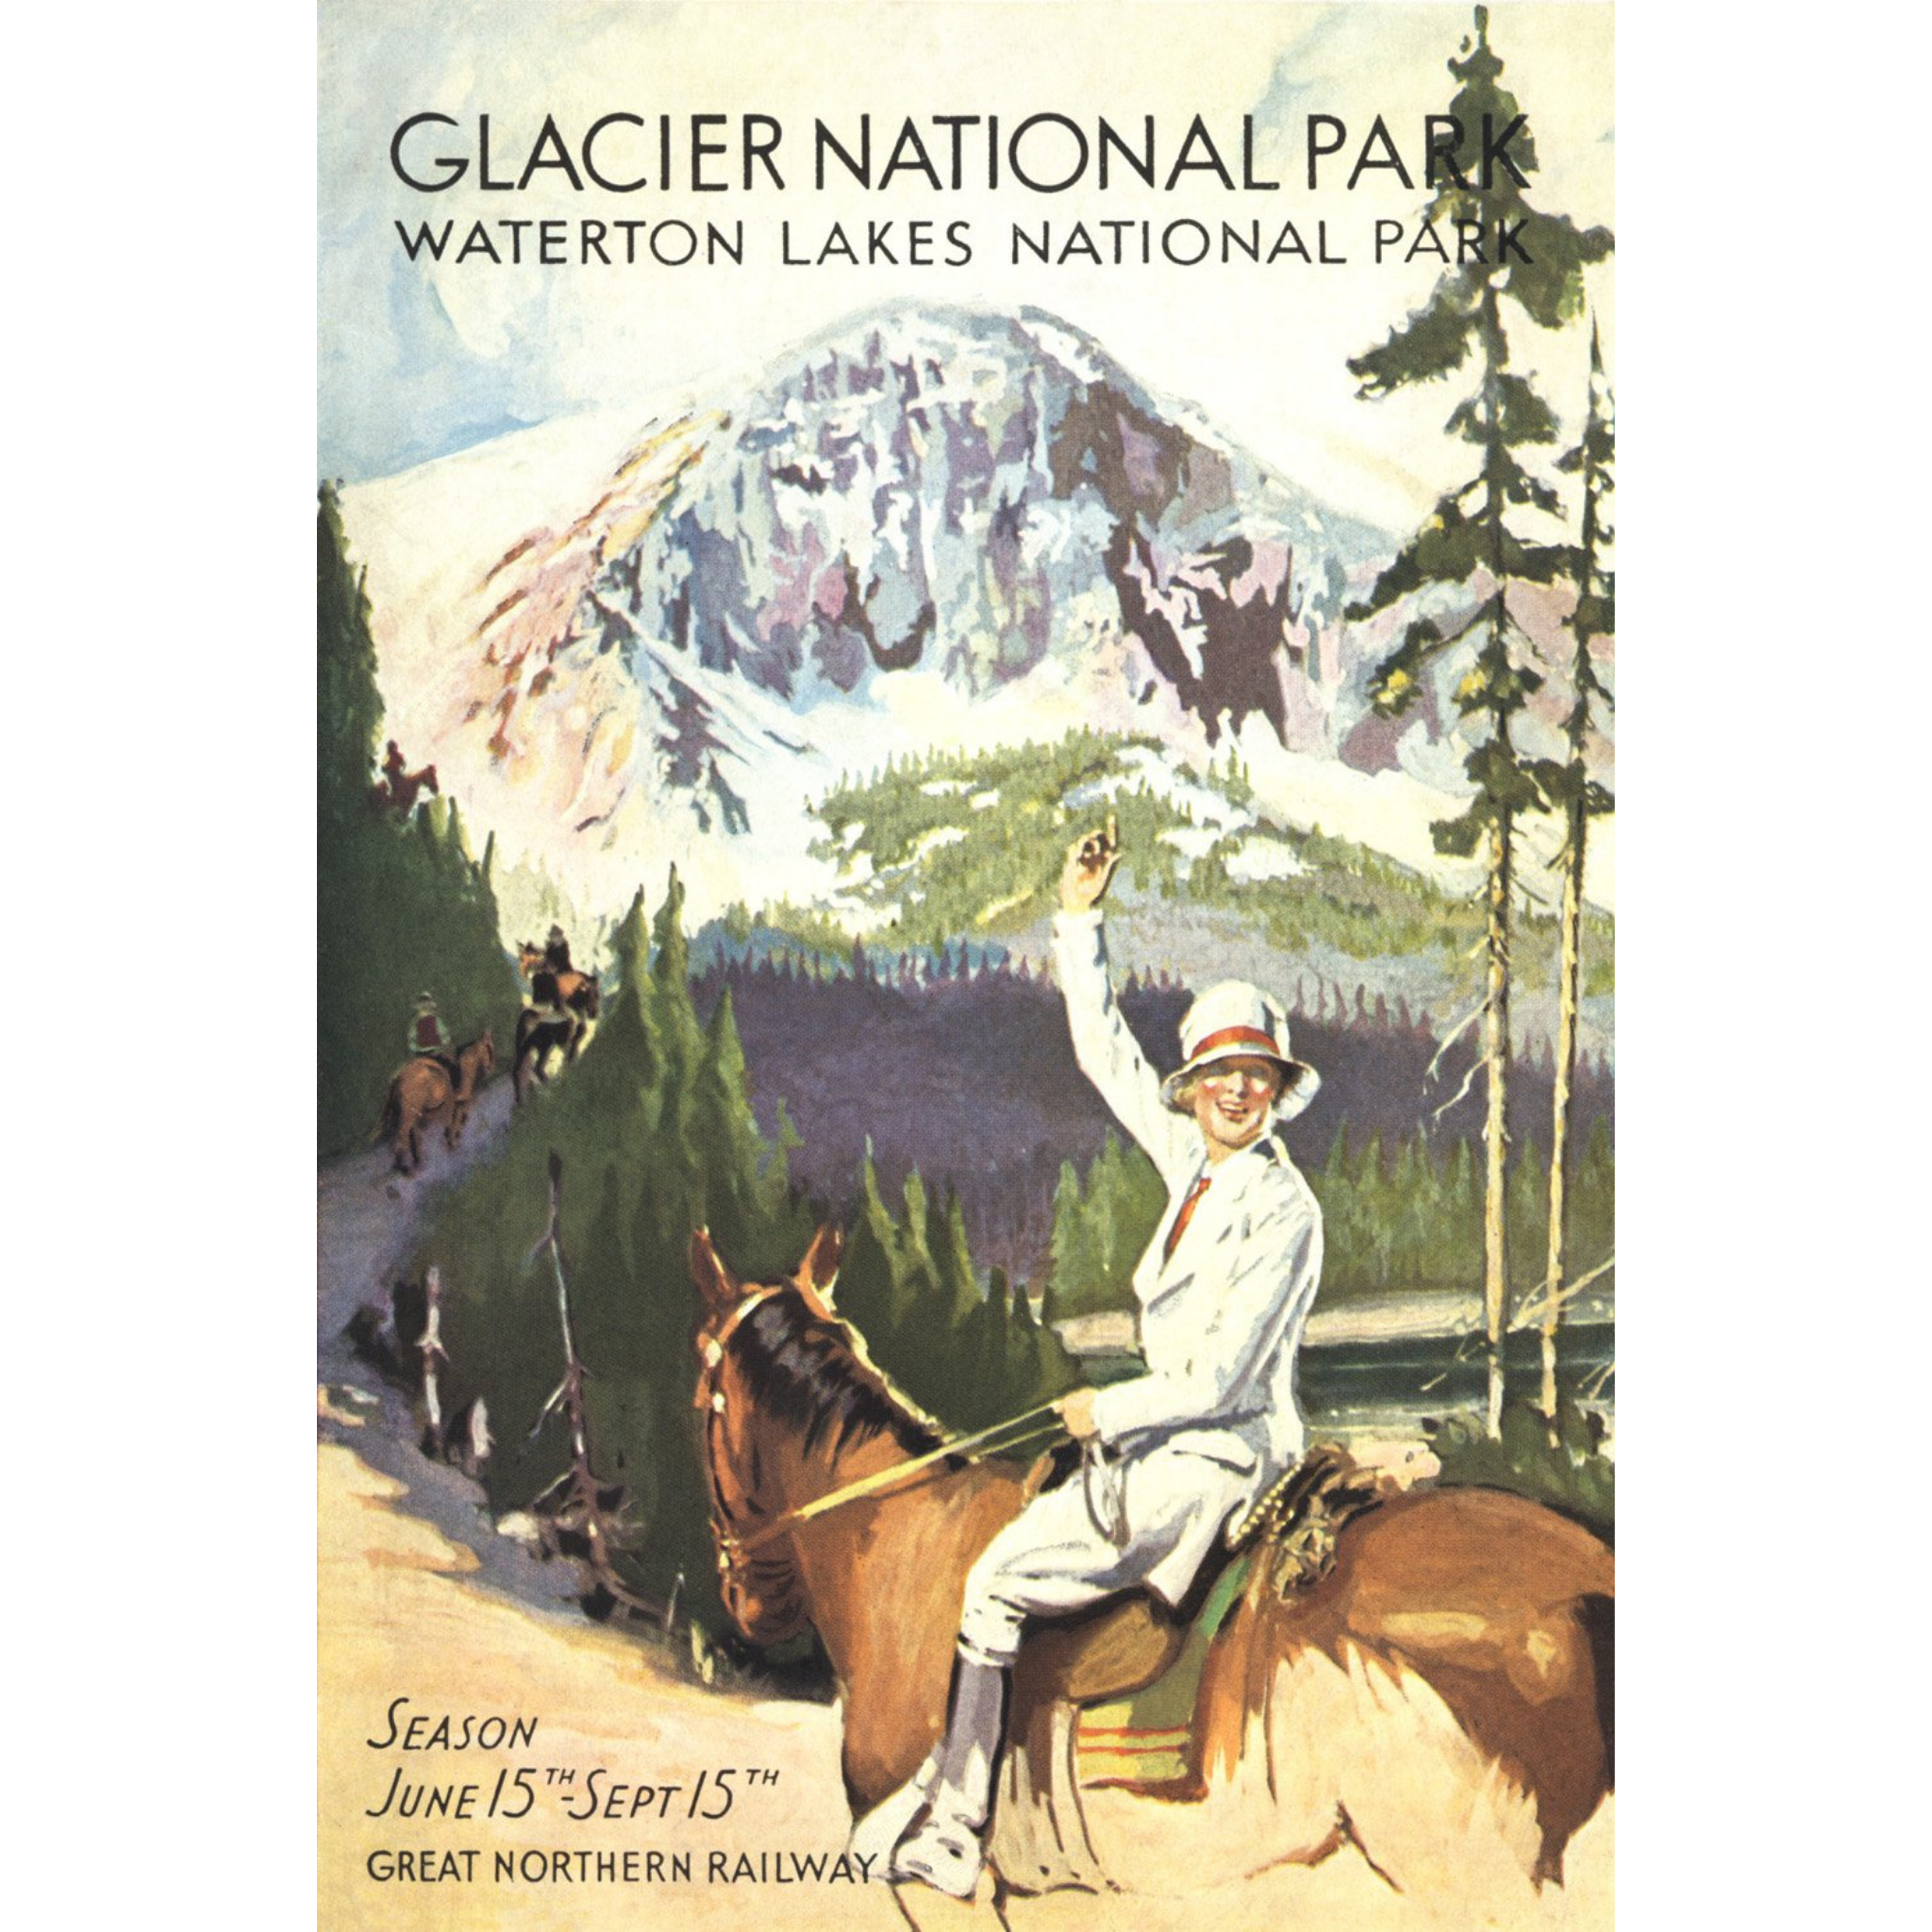 Glacier National Park: Girl on Horse 2 - ca. 1924 Lithograph